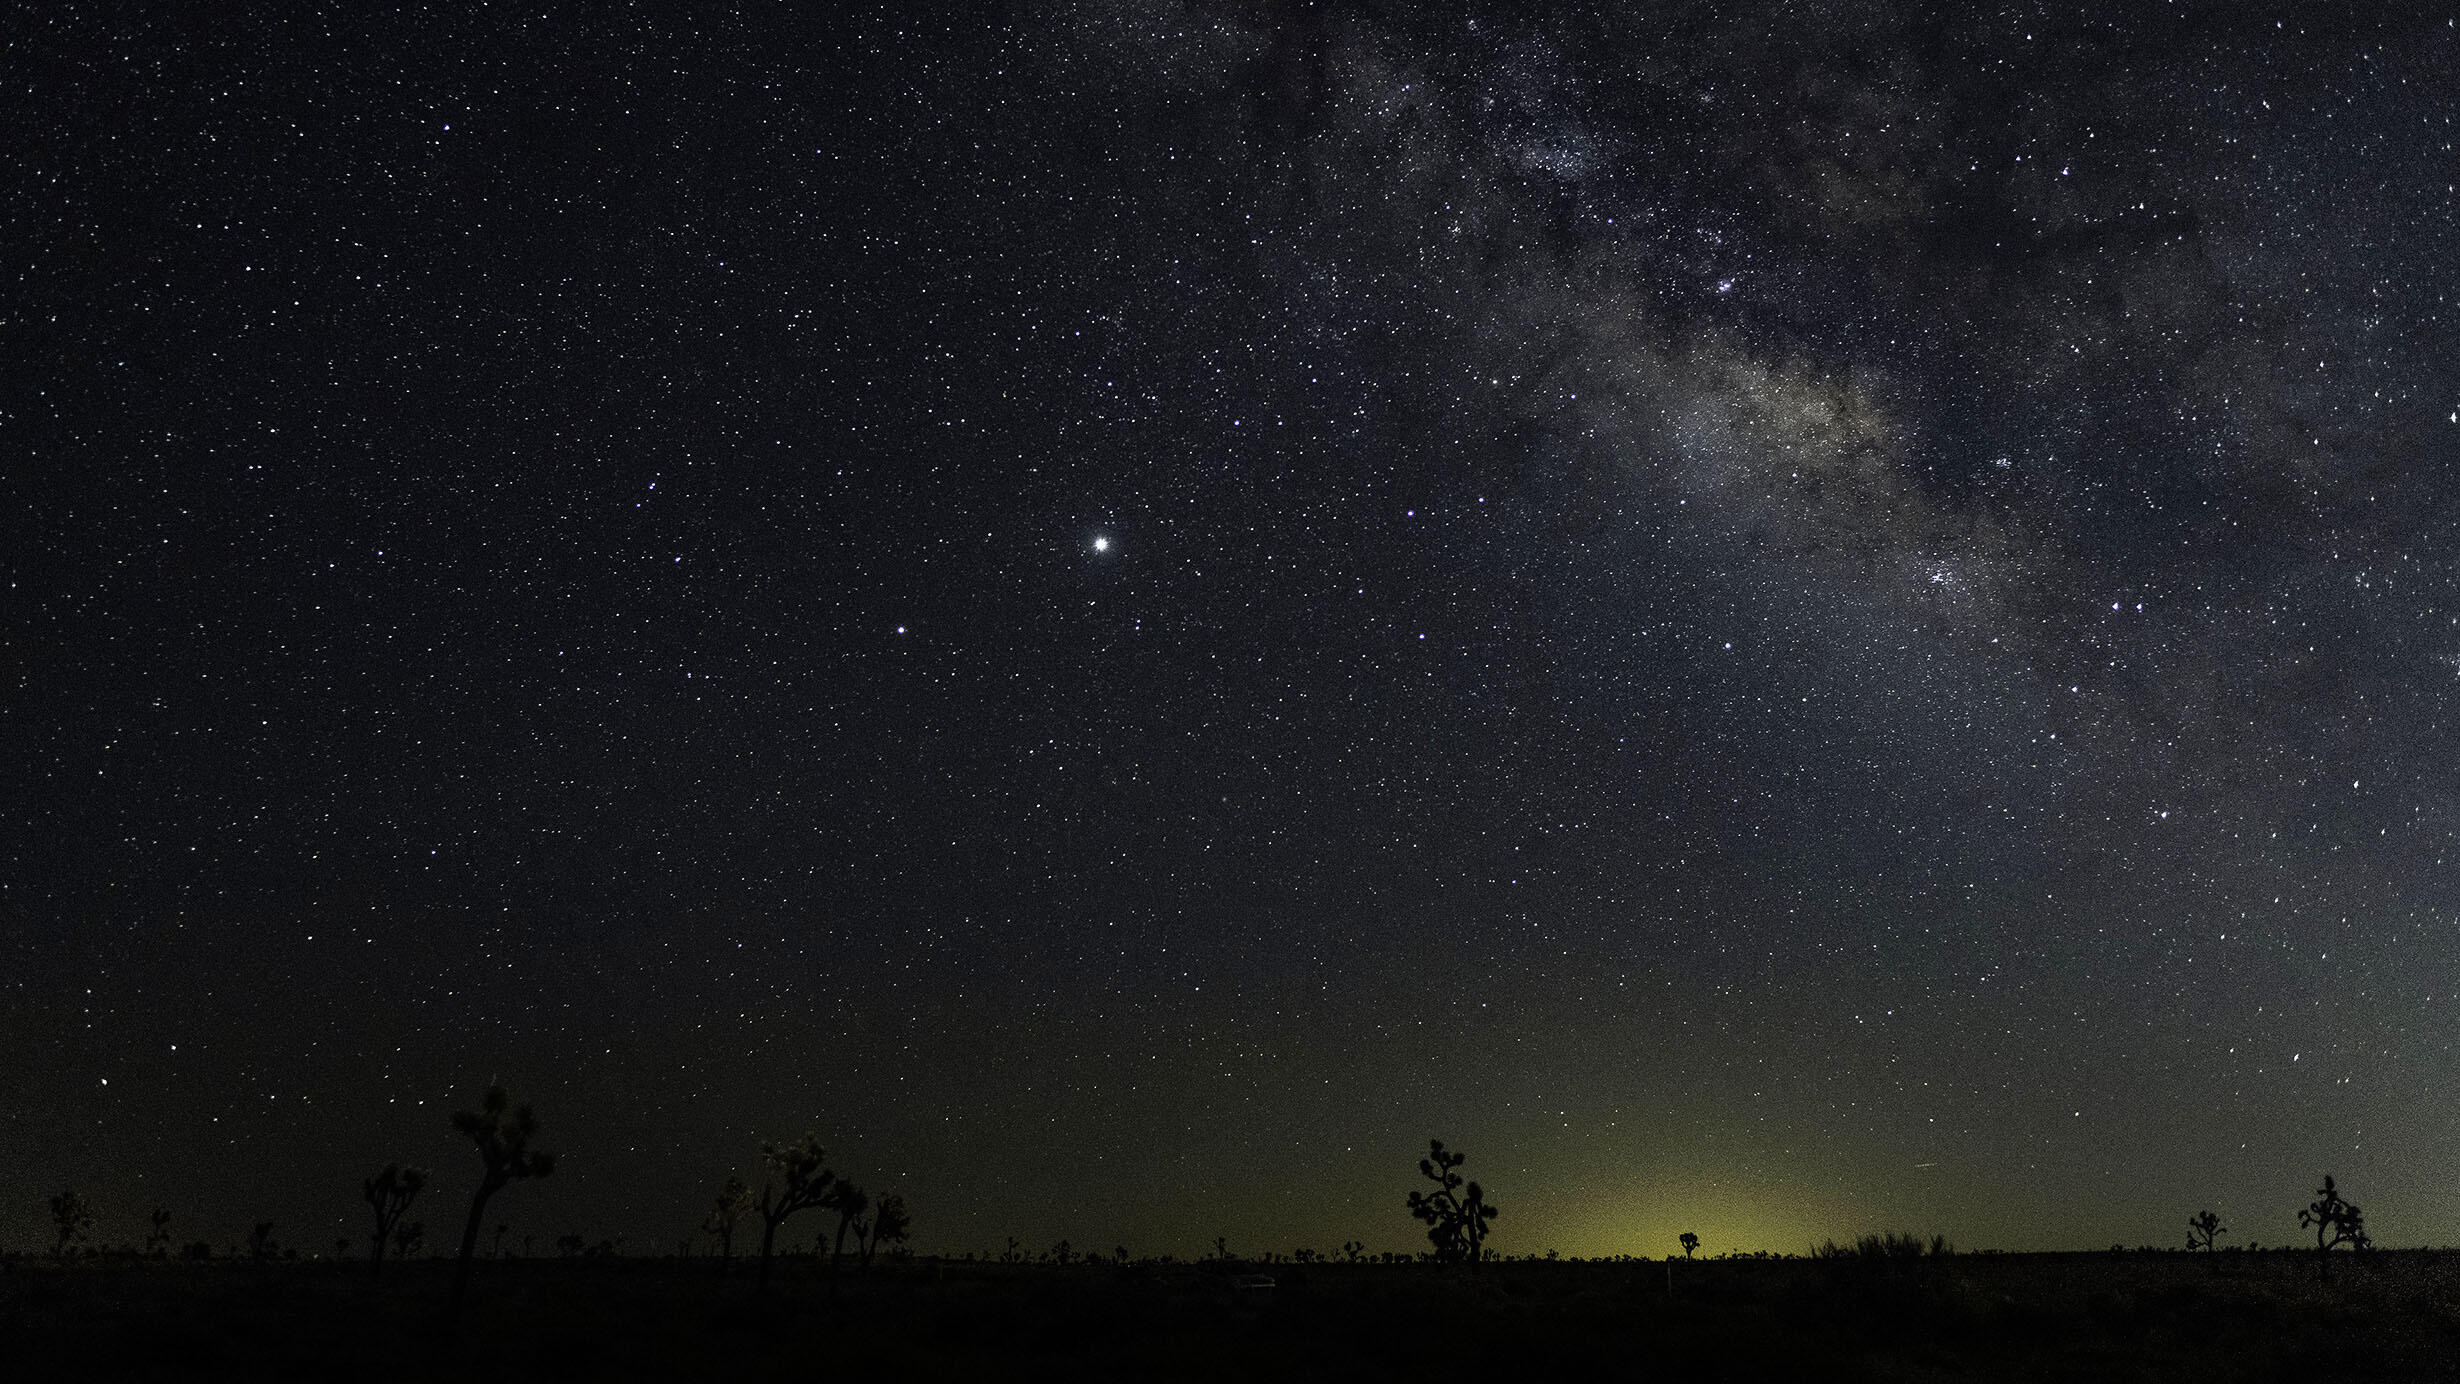 The Milky Way is bright over a field of darkened Joshua trees.